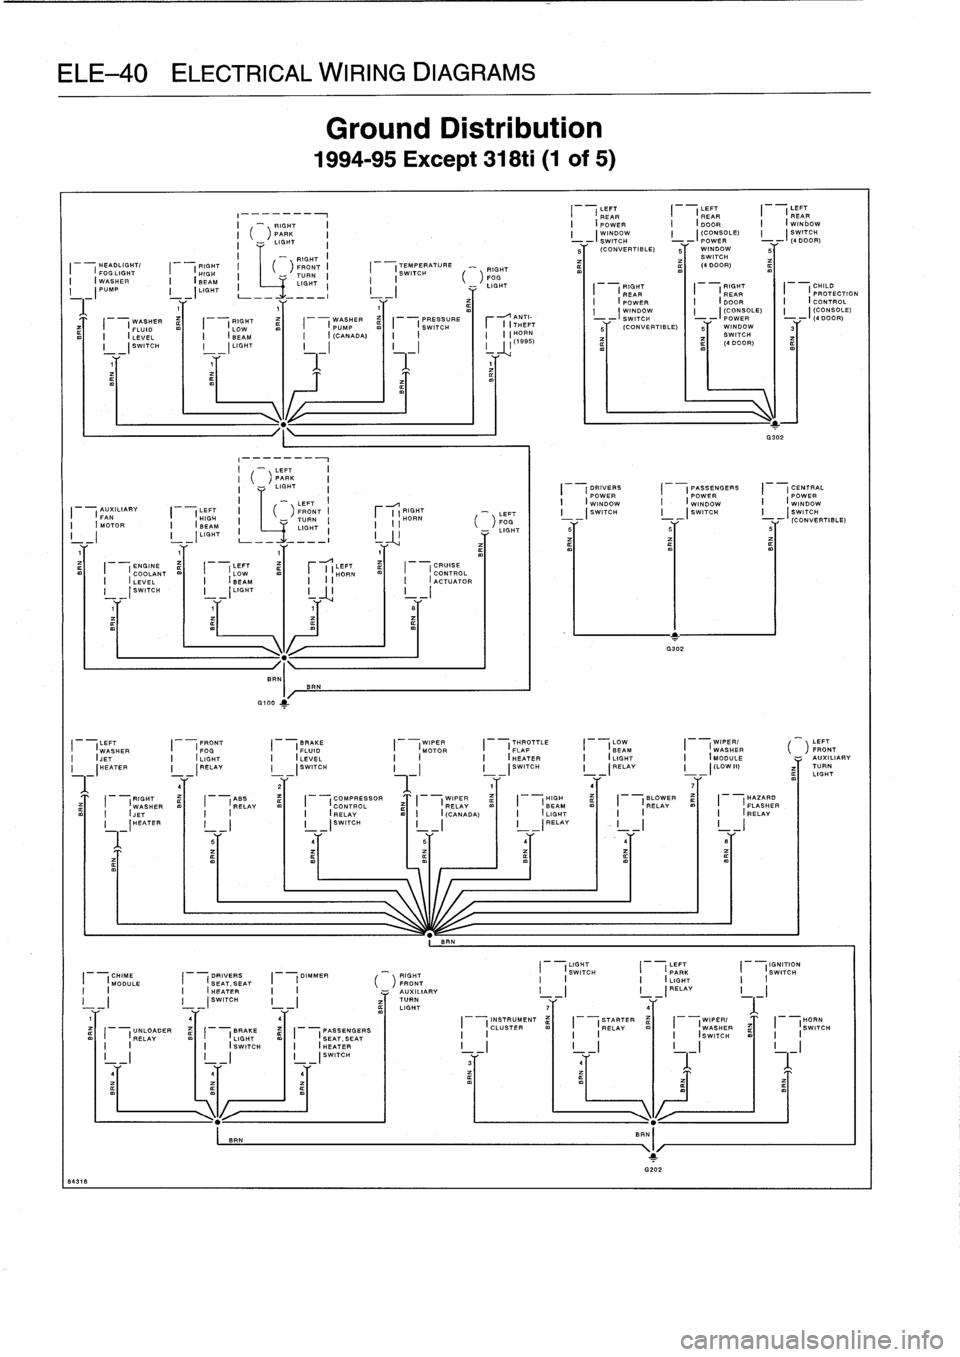 BMW 325i 1993 E36 Workshop Manual 
ELE-40
ELECTRICAL
WIRING
DIAGRAMS

RIGHTHEADLIGHT/

	

RIGHT
I

	

FRONT
I

	

FOG
LIGHT

	

I

	

HIGH

	

I

	

TURN
I

	

I
WASHER

	

I

	

I
BEAM

	

LIGHT
I
(PUMP

	

I
(LIGHT
,
L-
1

	

1

	

